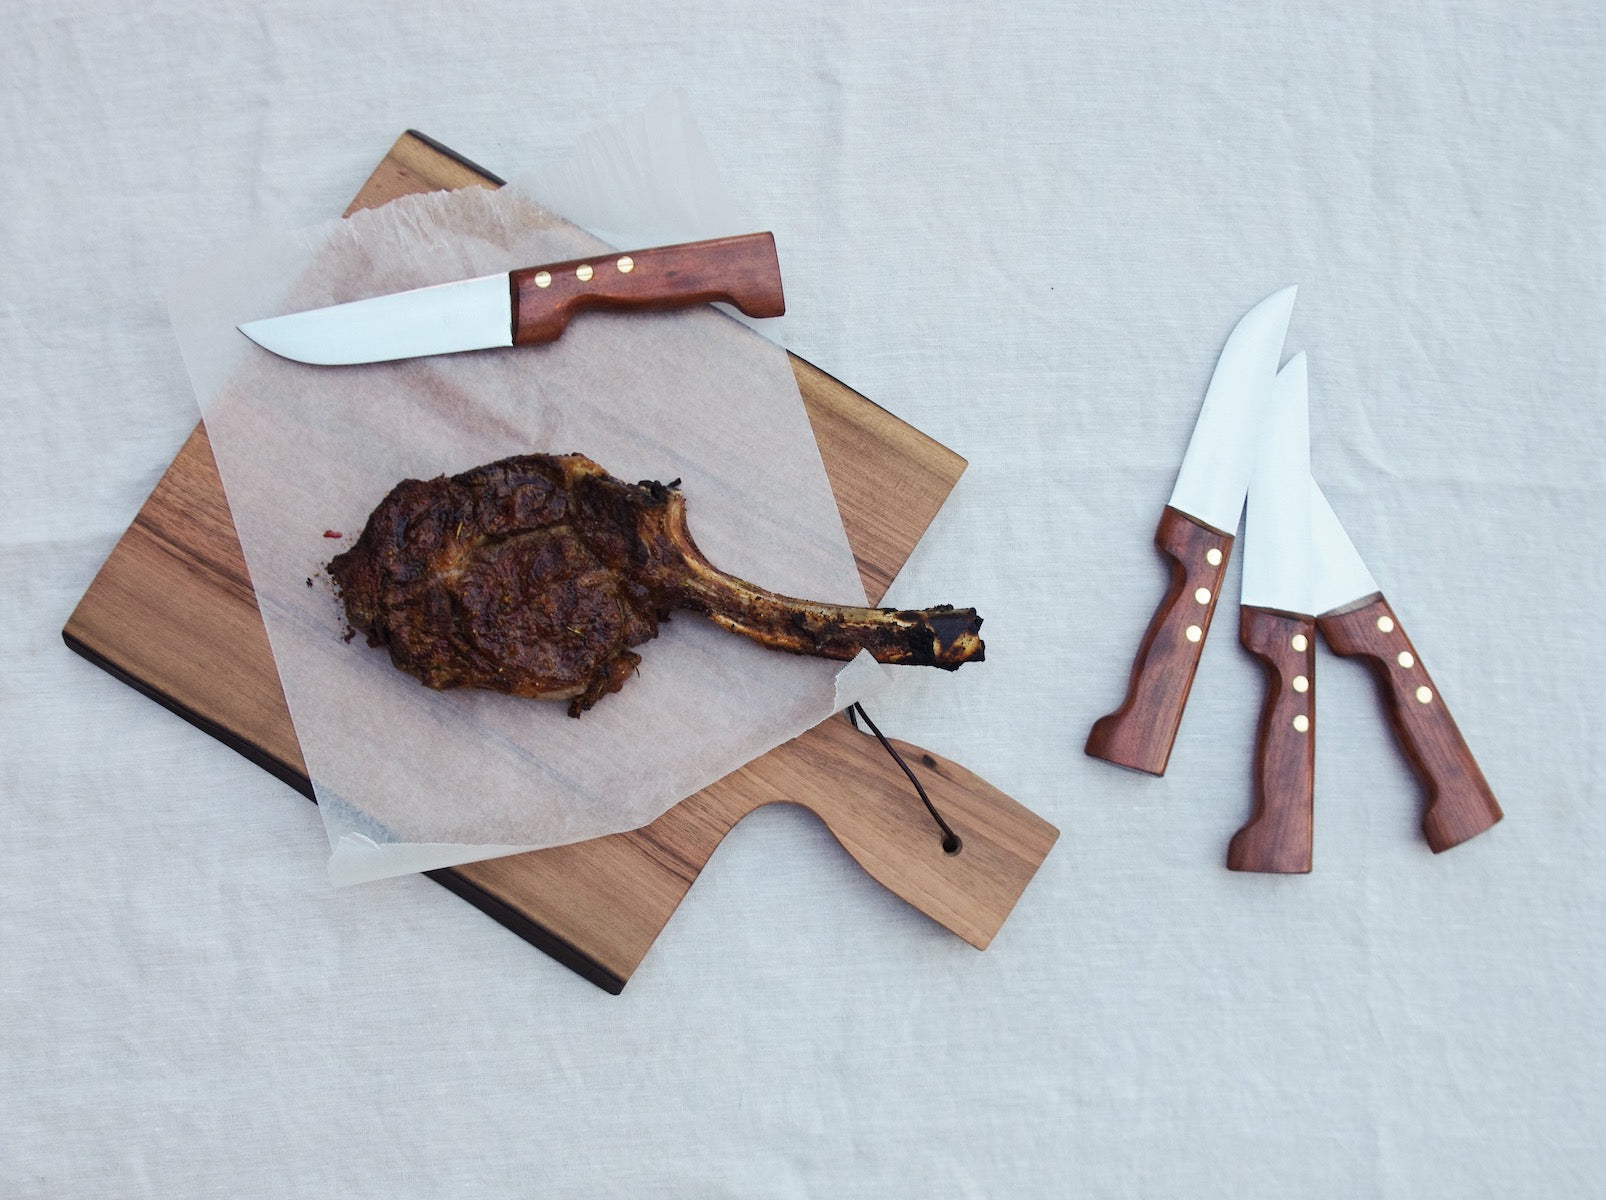 Knife and cooked meat on wooden cutting board.